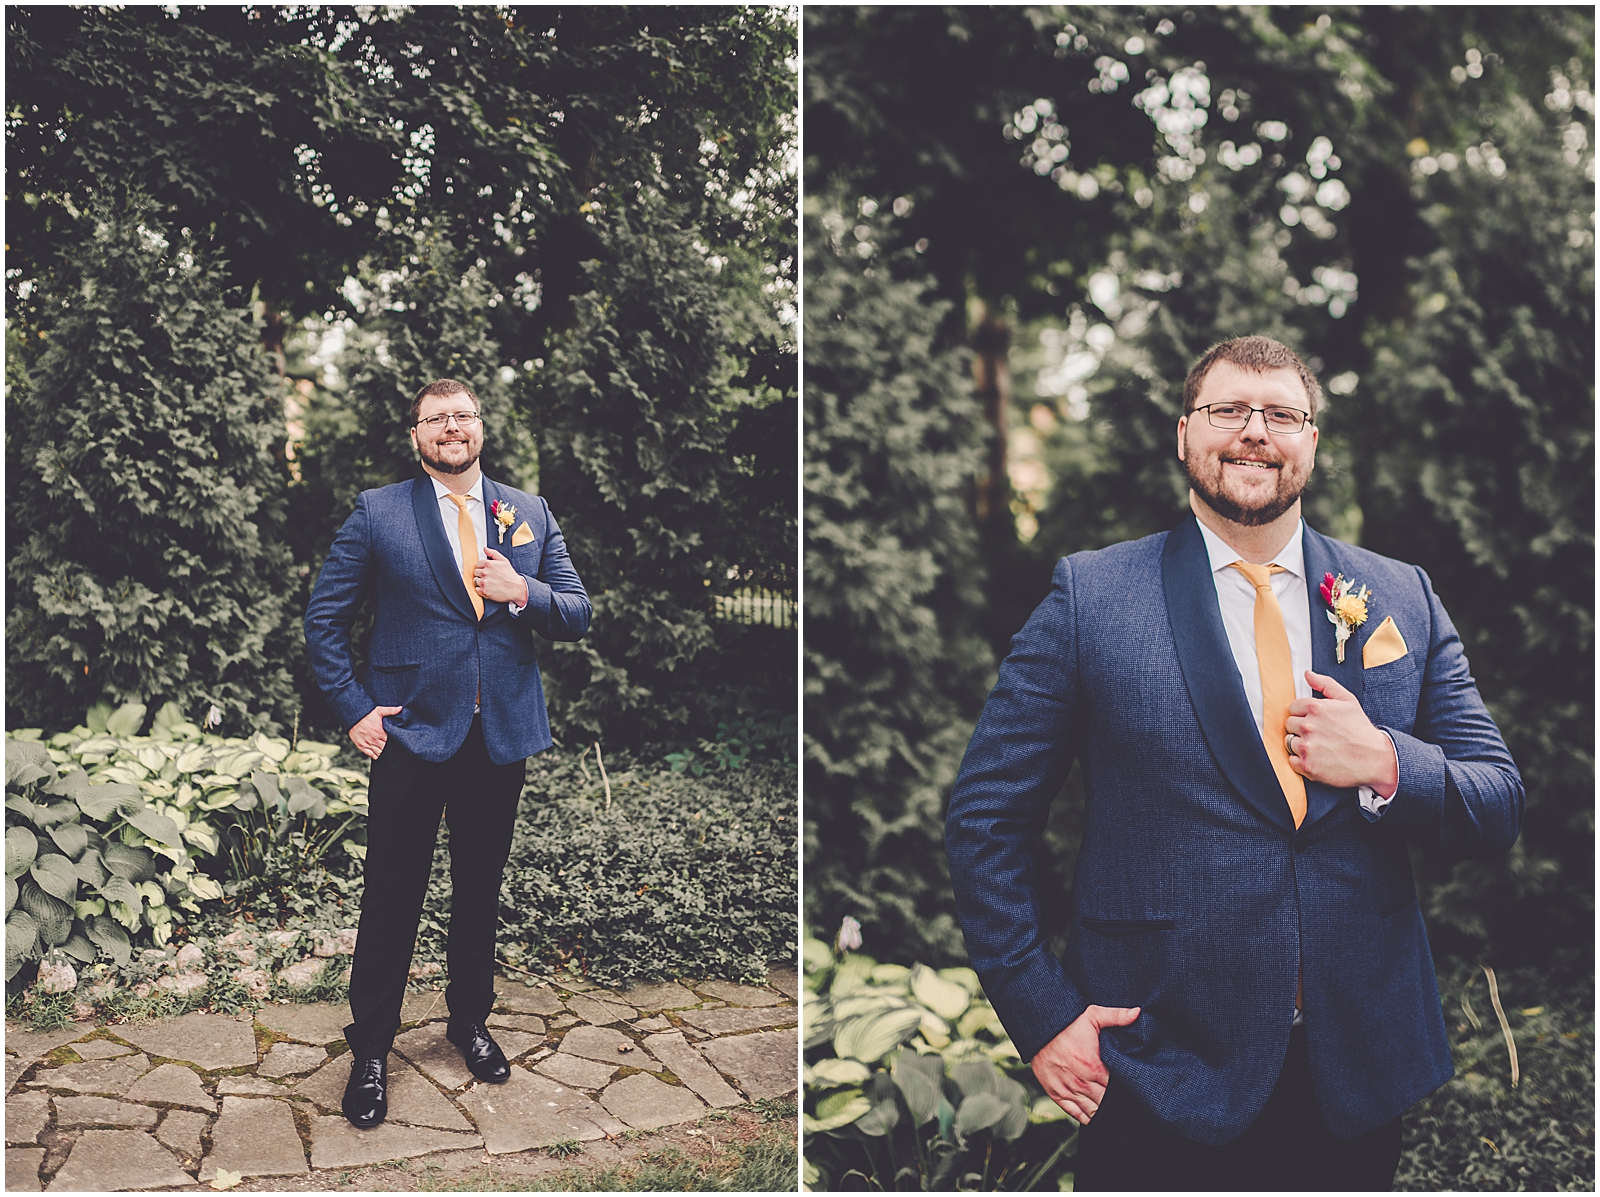 Janet and Michael's colorful summer backyard wedding in Bourbonnais, IL with Chicagoland wedding photographer Kara Evans Photographer.